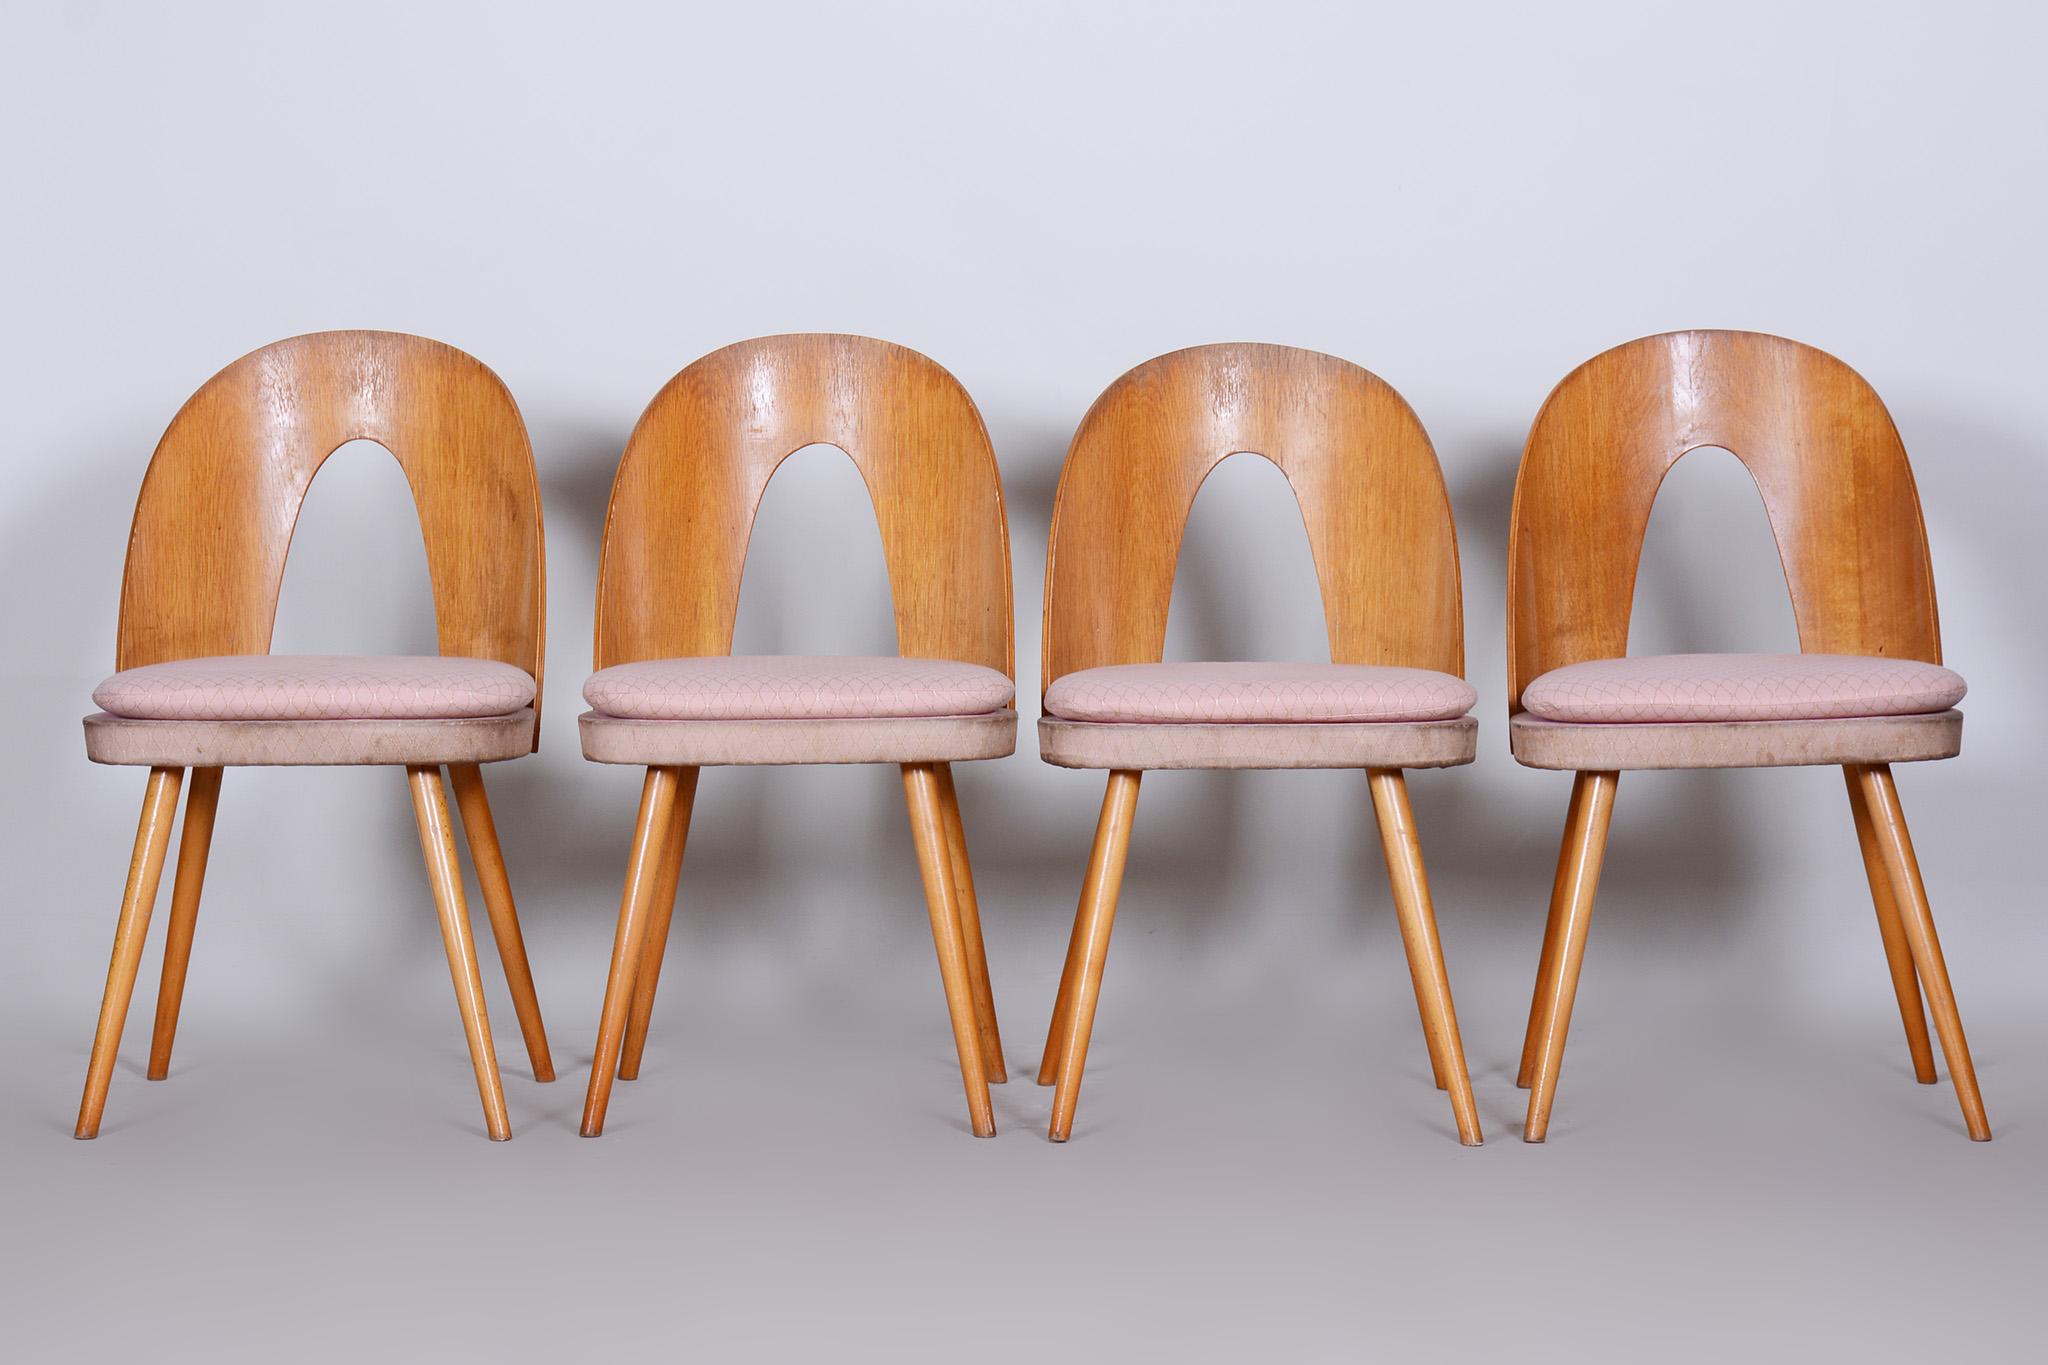 Set of four Mid-Century Modern chairs made in 1950s Czechia by Antonín Šuman

In pristine original condition, the upholstery has been professionally cleaned and its polish revived by our refurbushing team in Czechia. 

You can find a set of